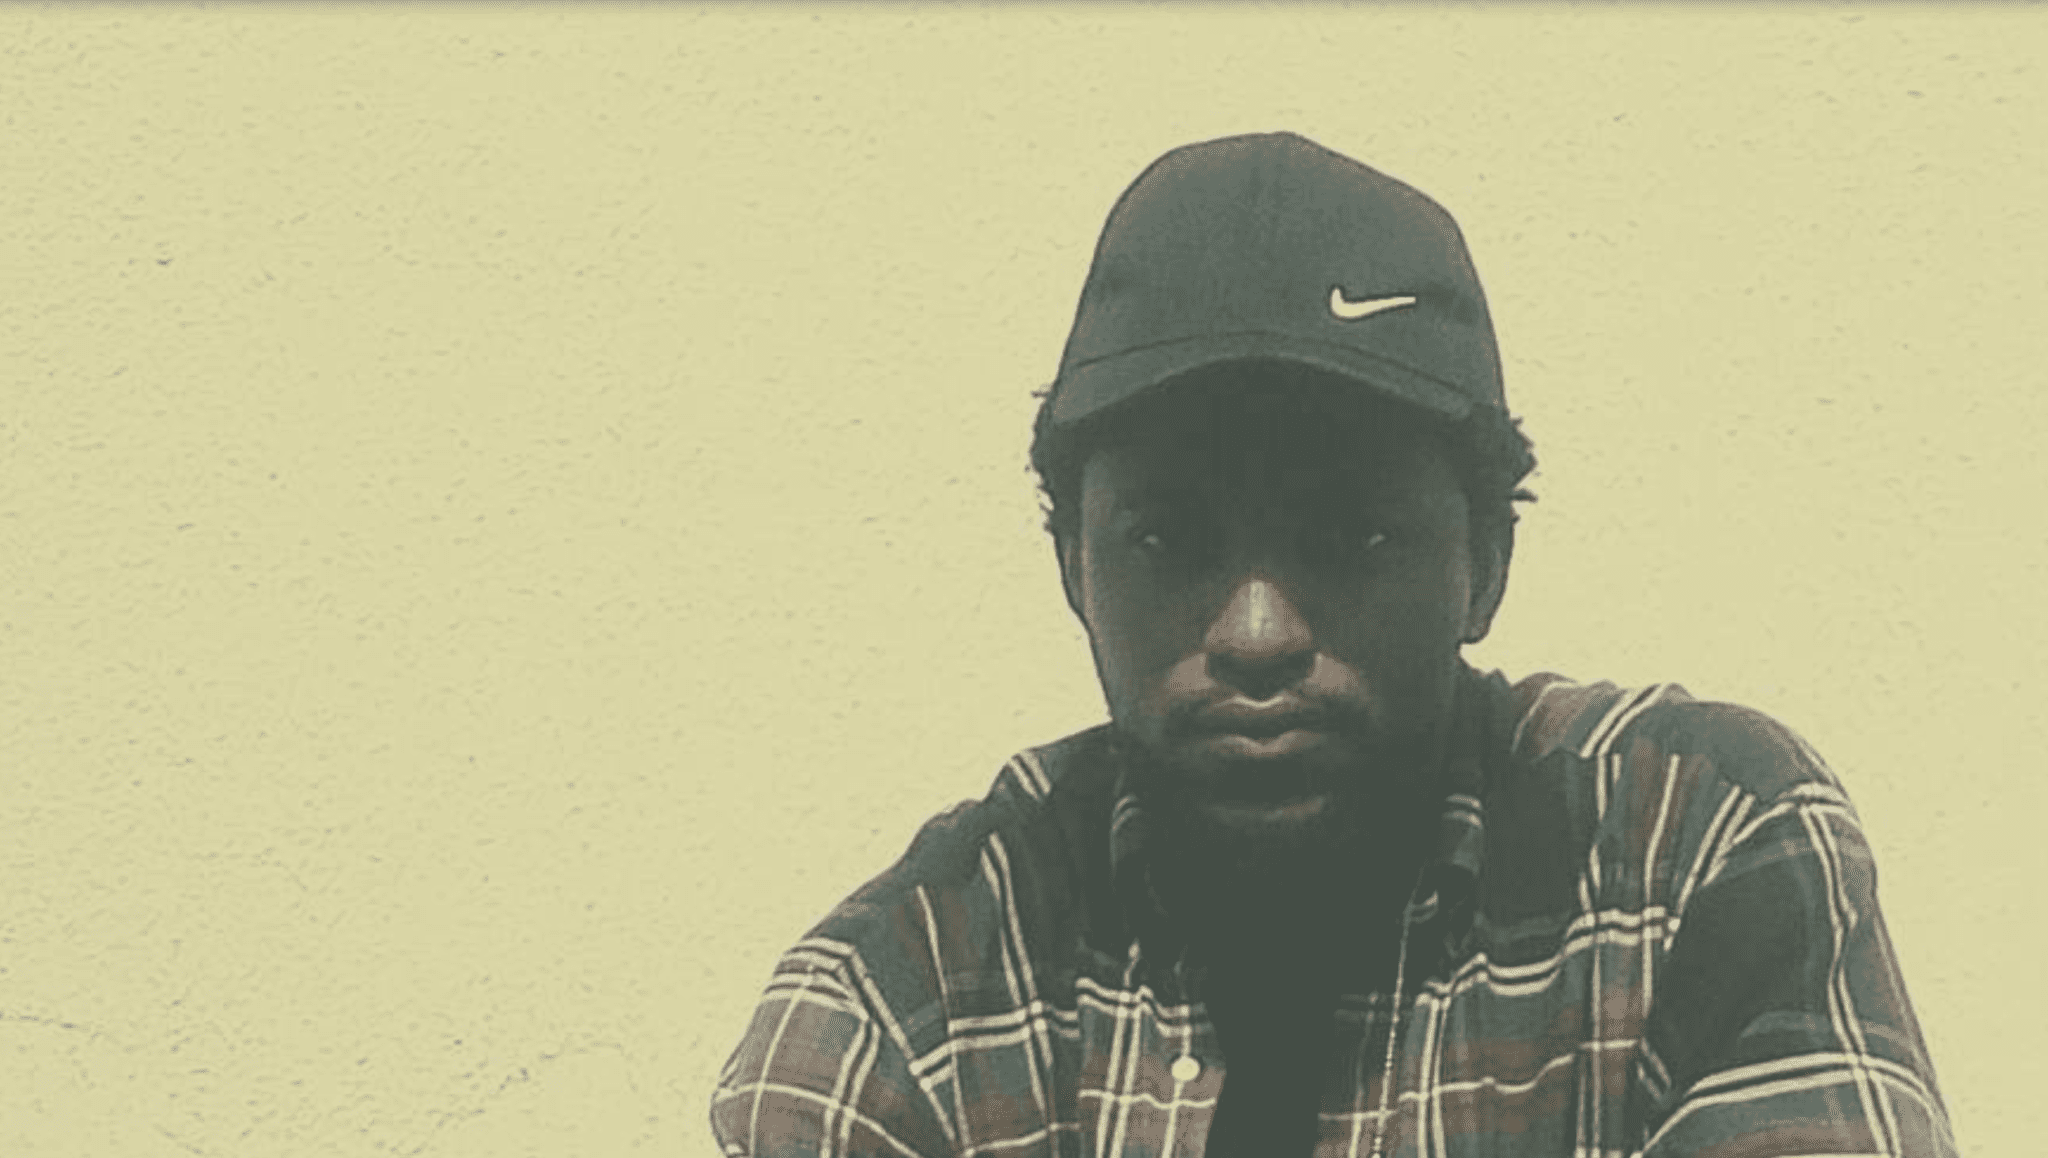 Listen to PayBac’s “Lagos On My Mind” and get ready for his Solo debut album